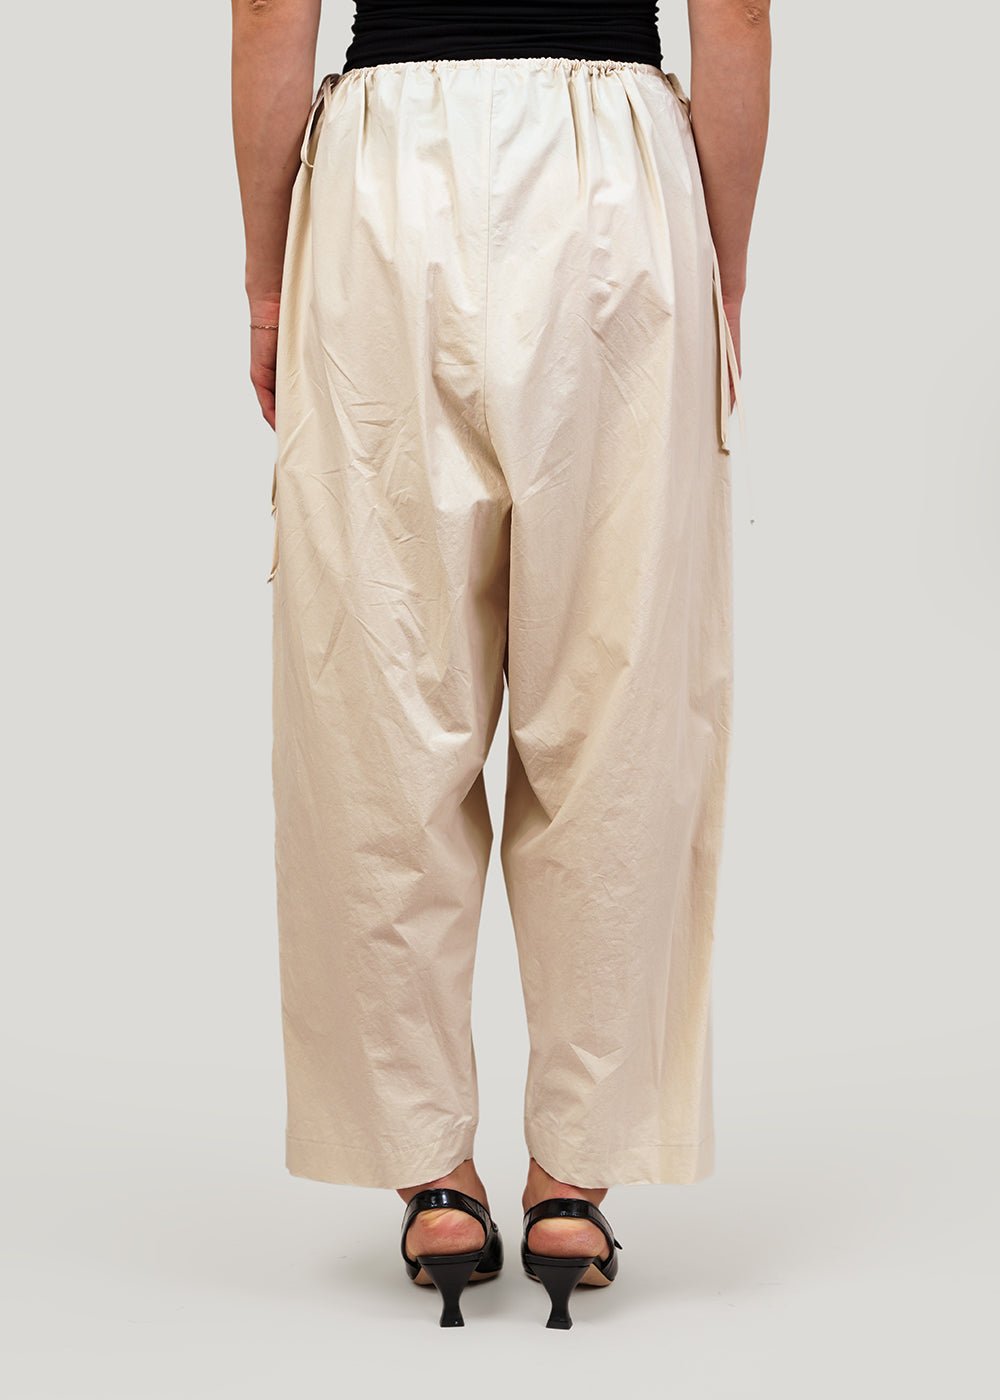 Modern Weaving Parchment Balloon Pant - New Classics Studios Sustainable Ethical Fashion Canada